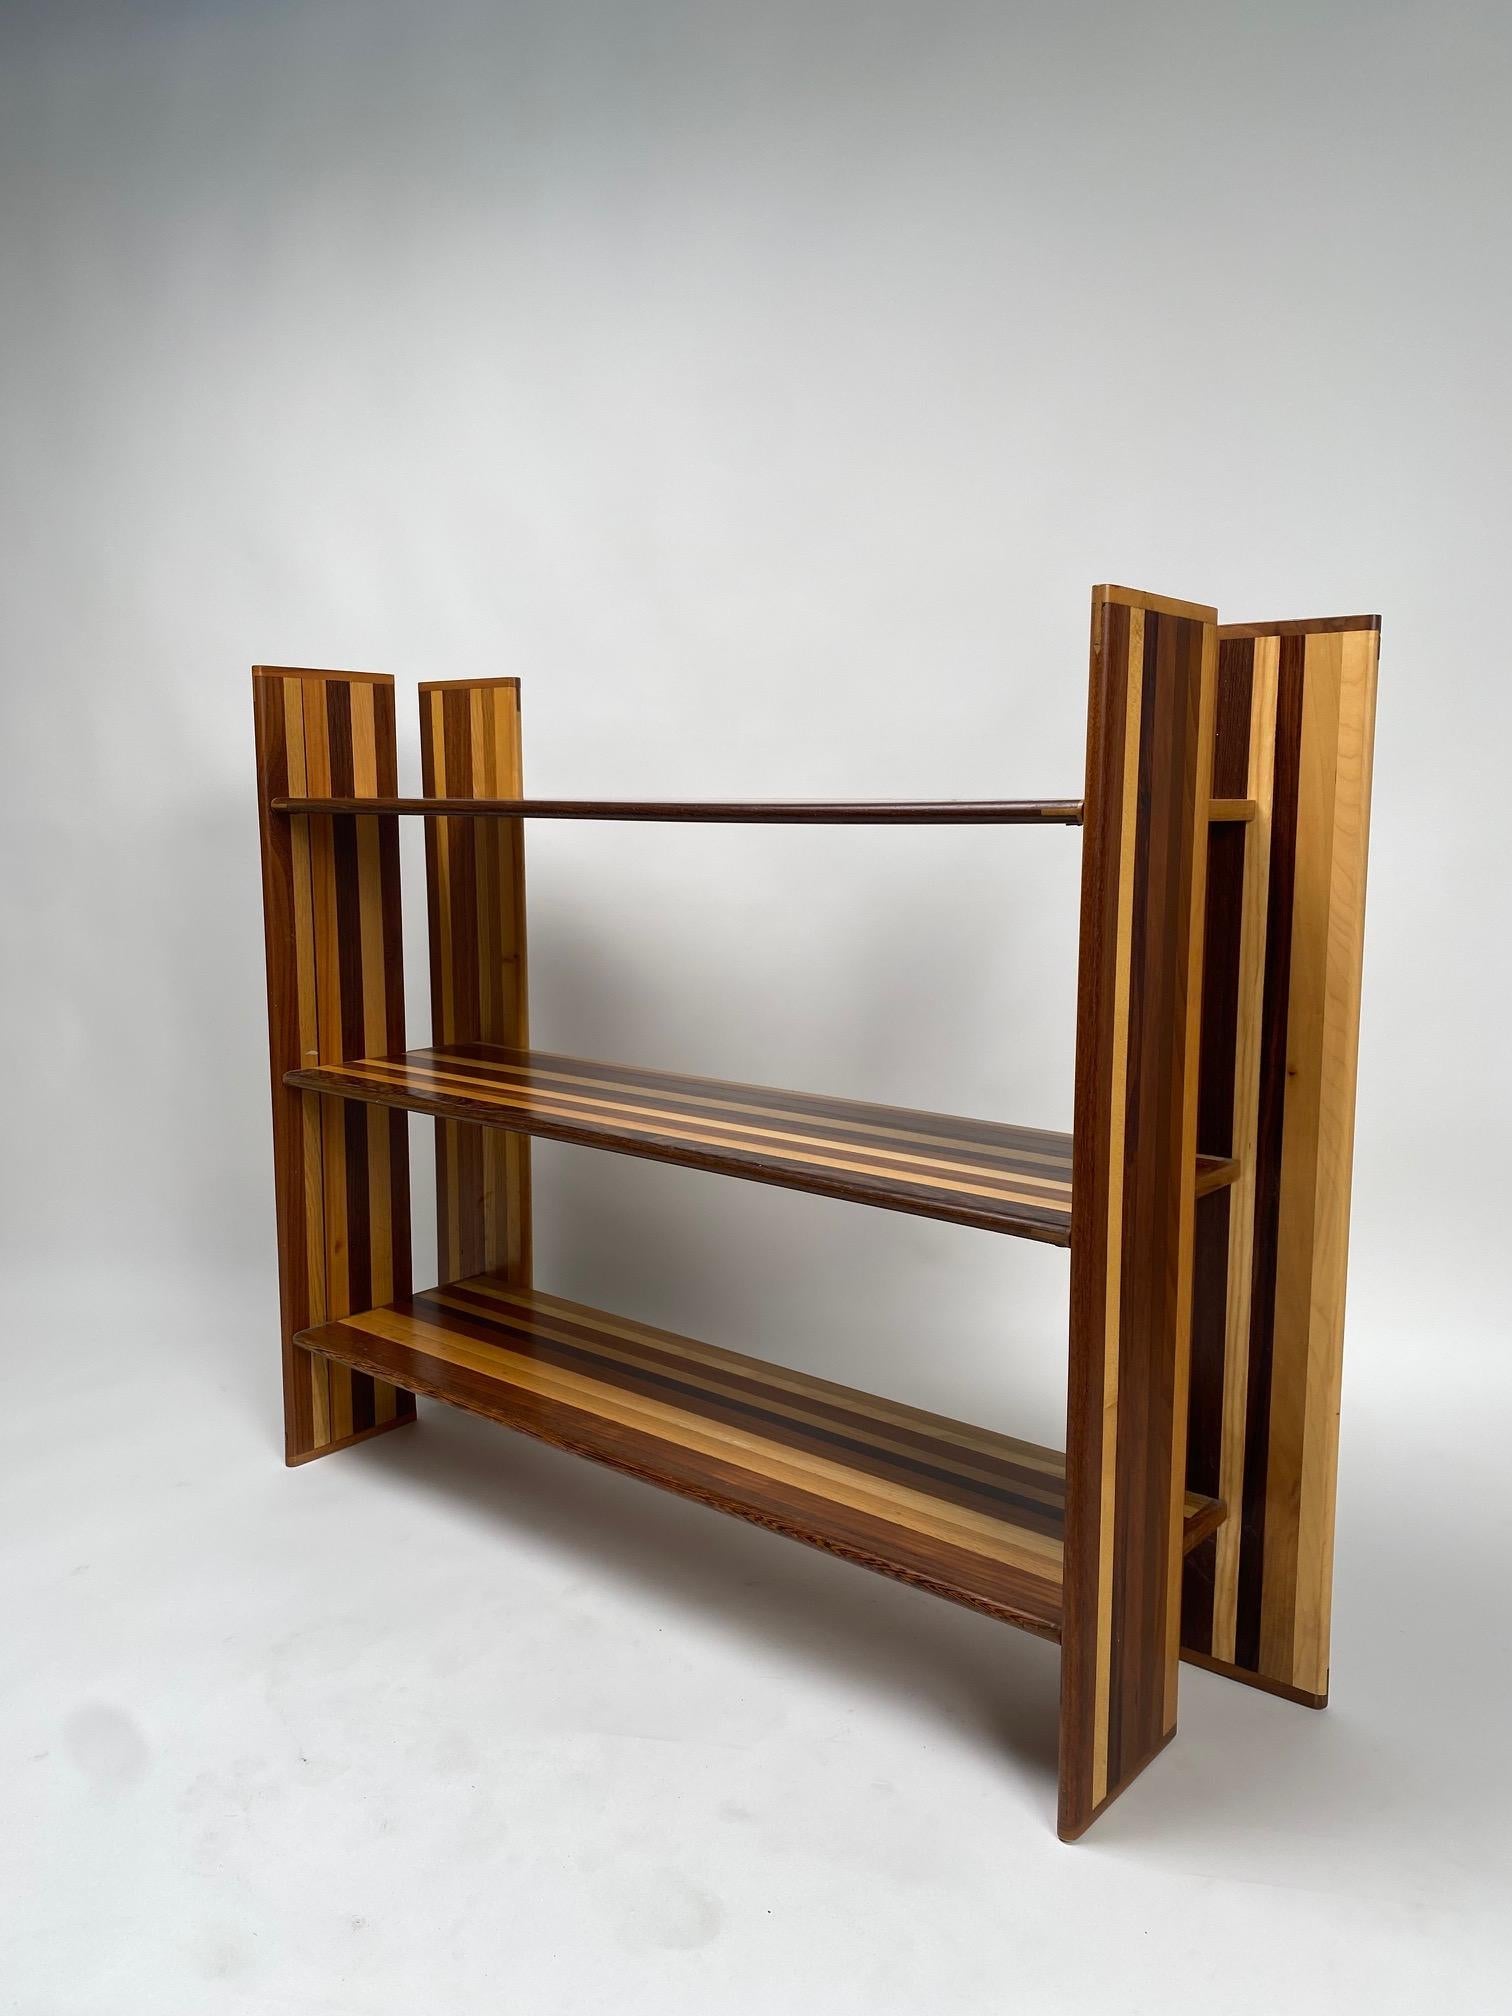 MOP, Divider bookcase made by Afra and Tobia Scarpa for the Molteni company, Italy, 1974

It is one of the most original projects of the famous couple of Italian architects and designers, created by combining wood of different essences and giving